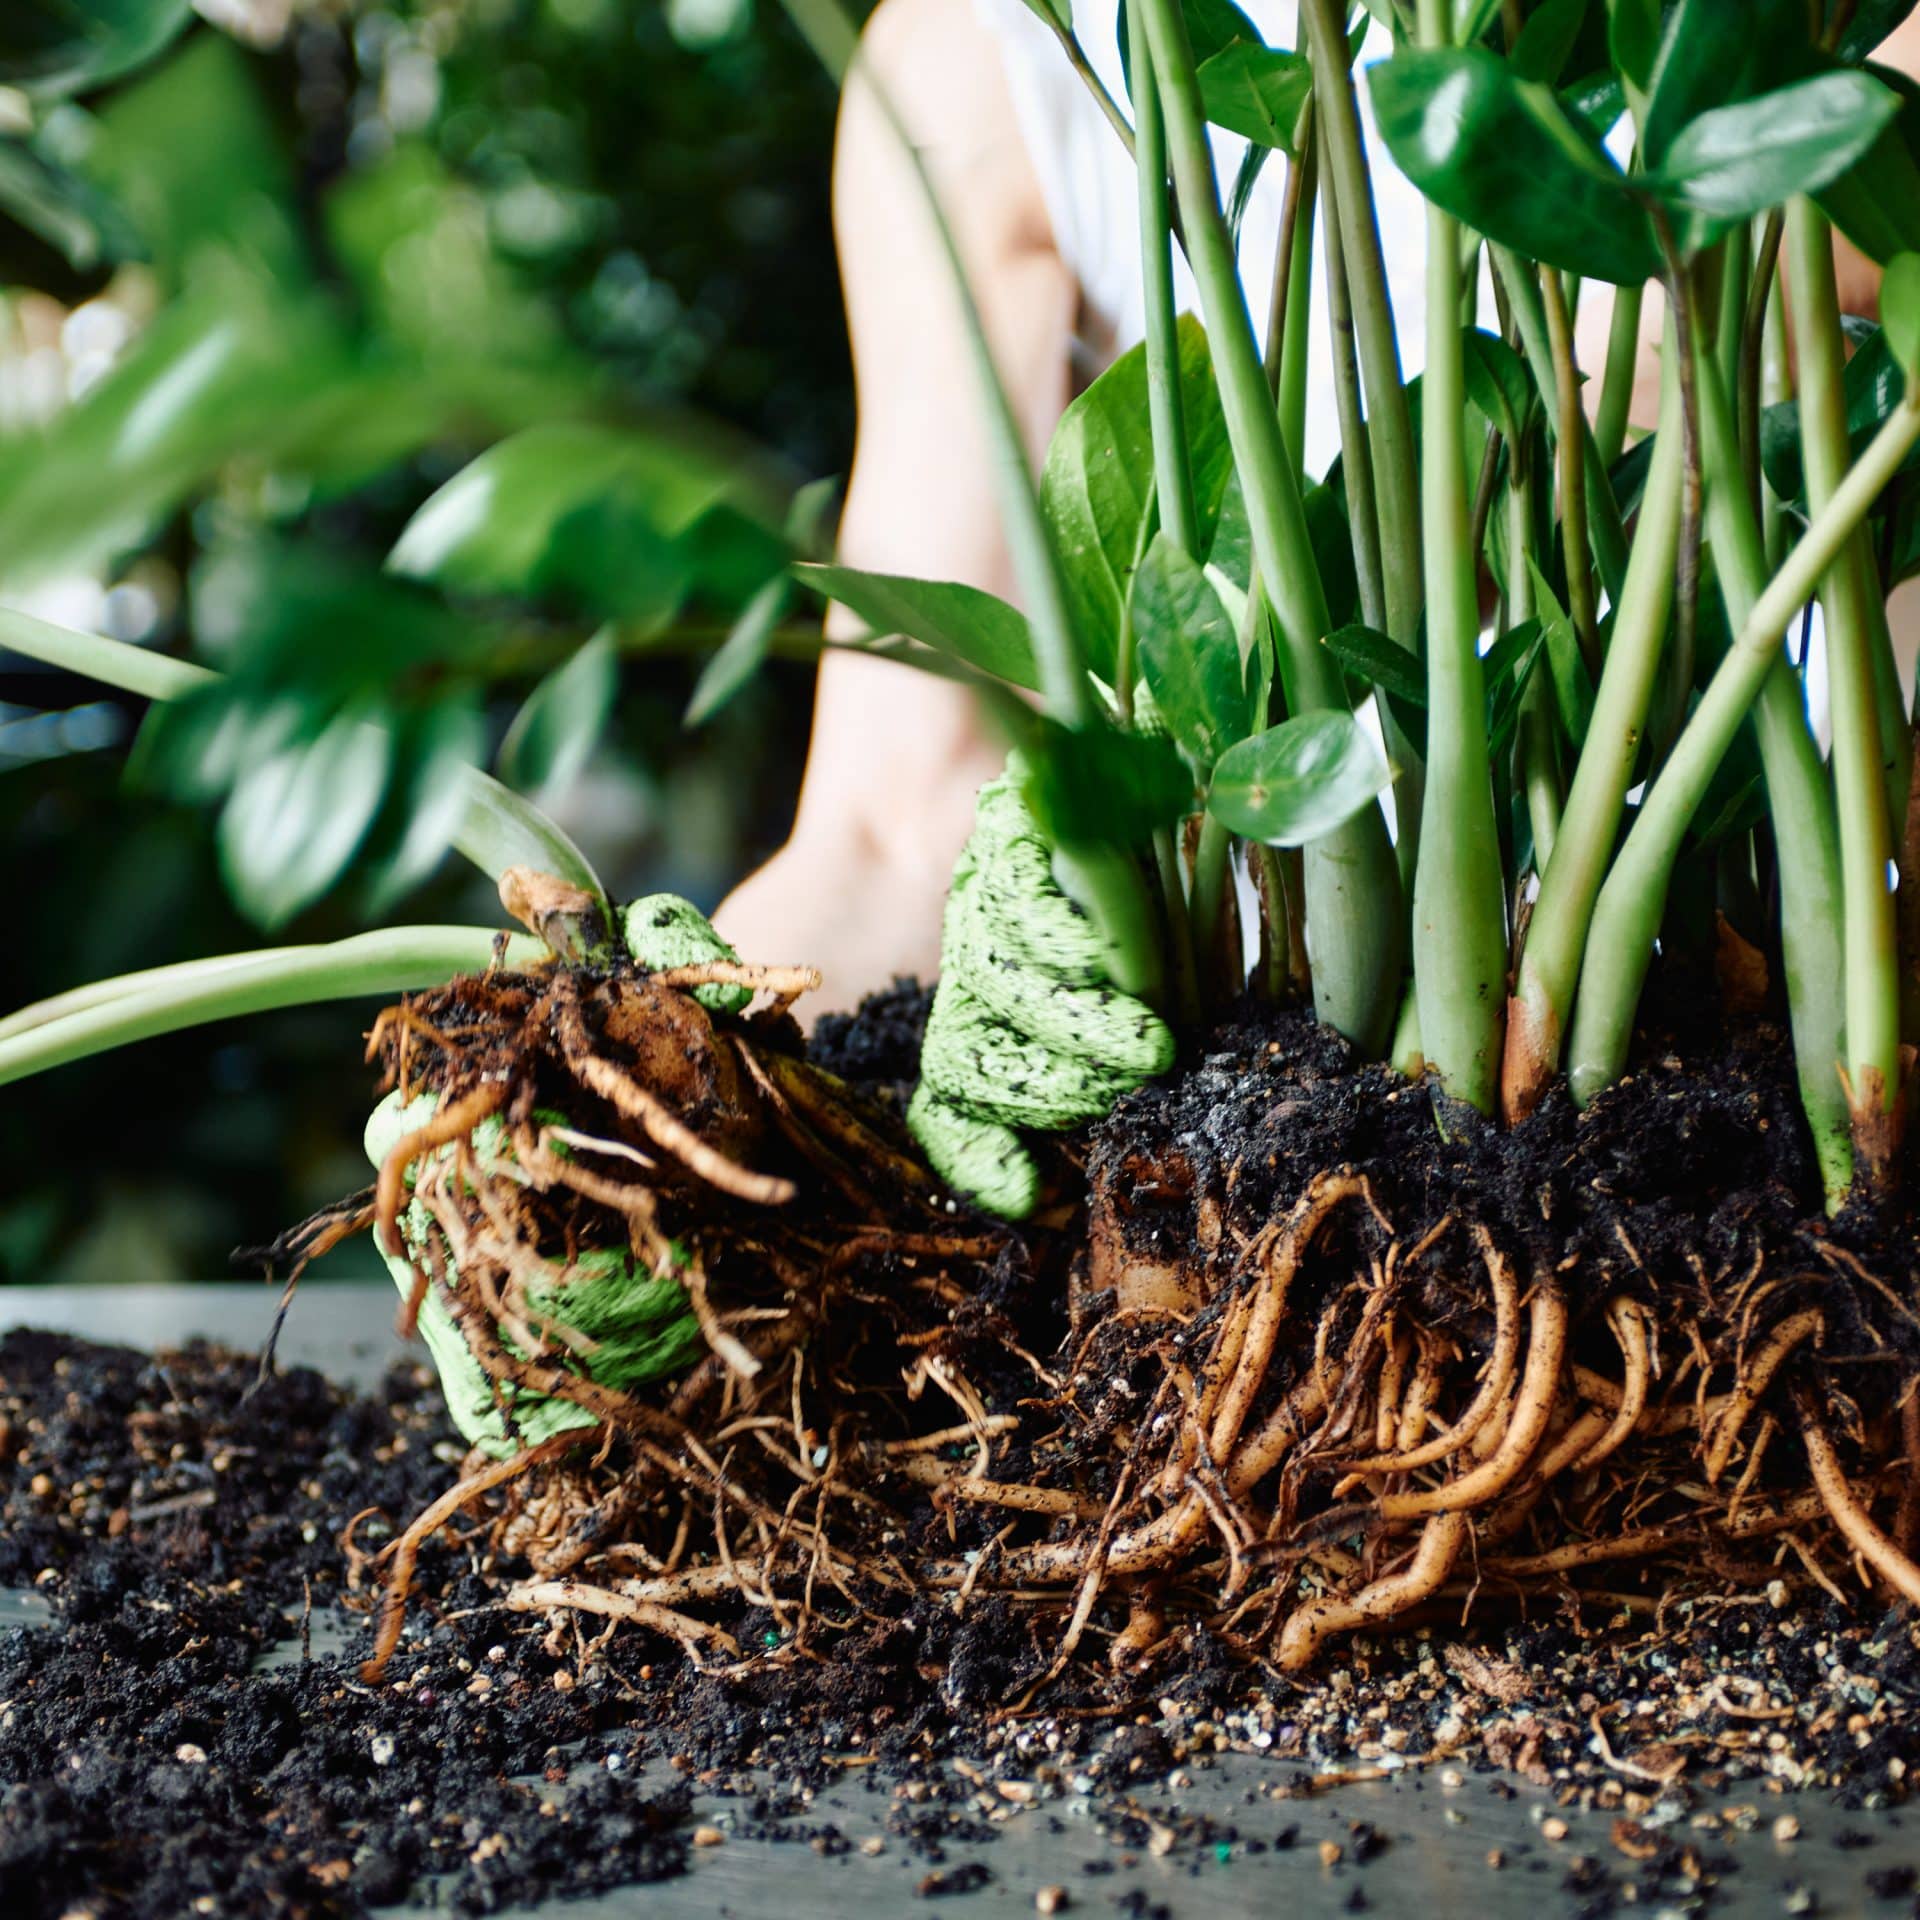 A close-up image of a gardener wearing green gloves while inspecting the rhizomes and roots of a ZZ plant. The focus is on the gardener's hands as they handle the dense network of brown roots and moist soil. Lush green leaves and stems are visibly sprouting from the top of the plant, set against a backdrop of other indoor plants.